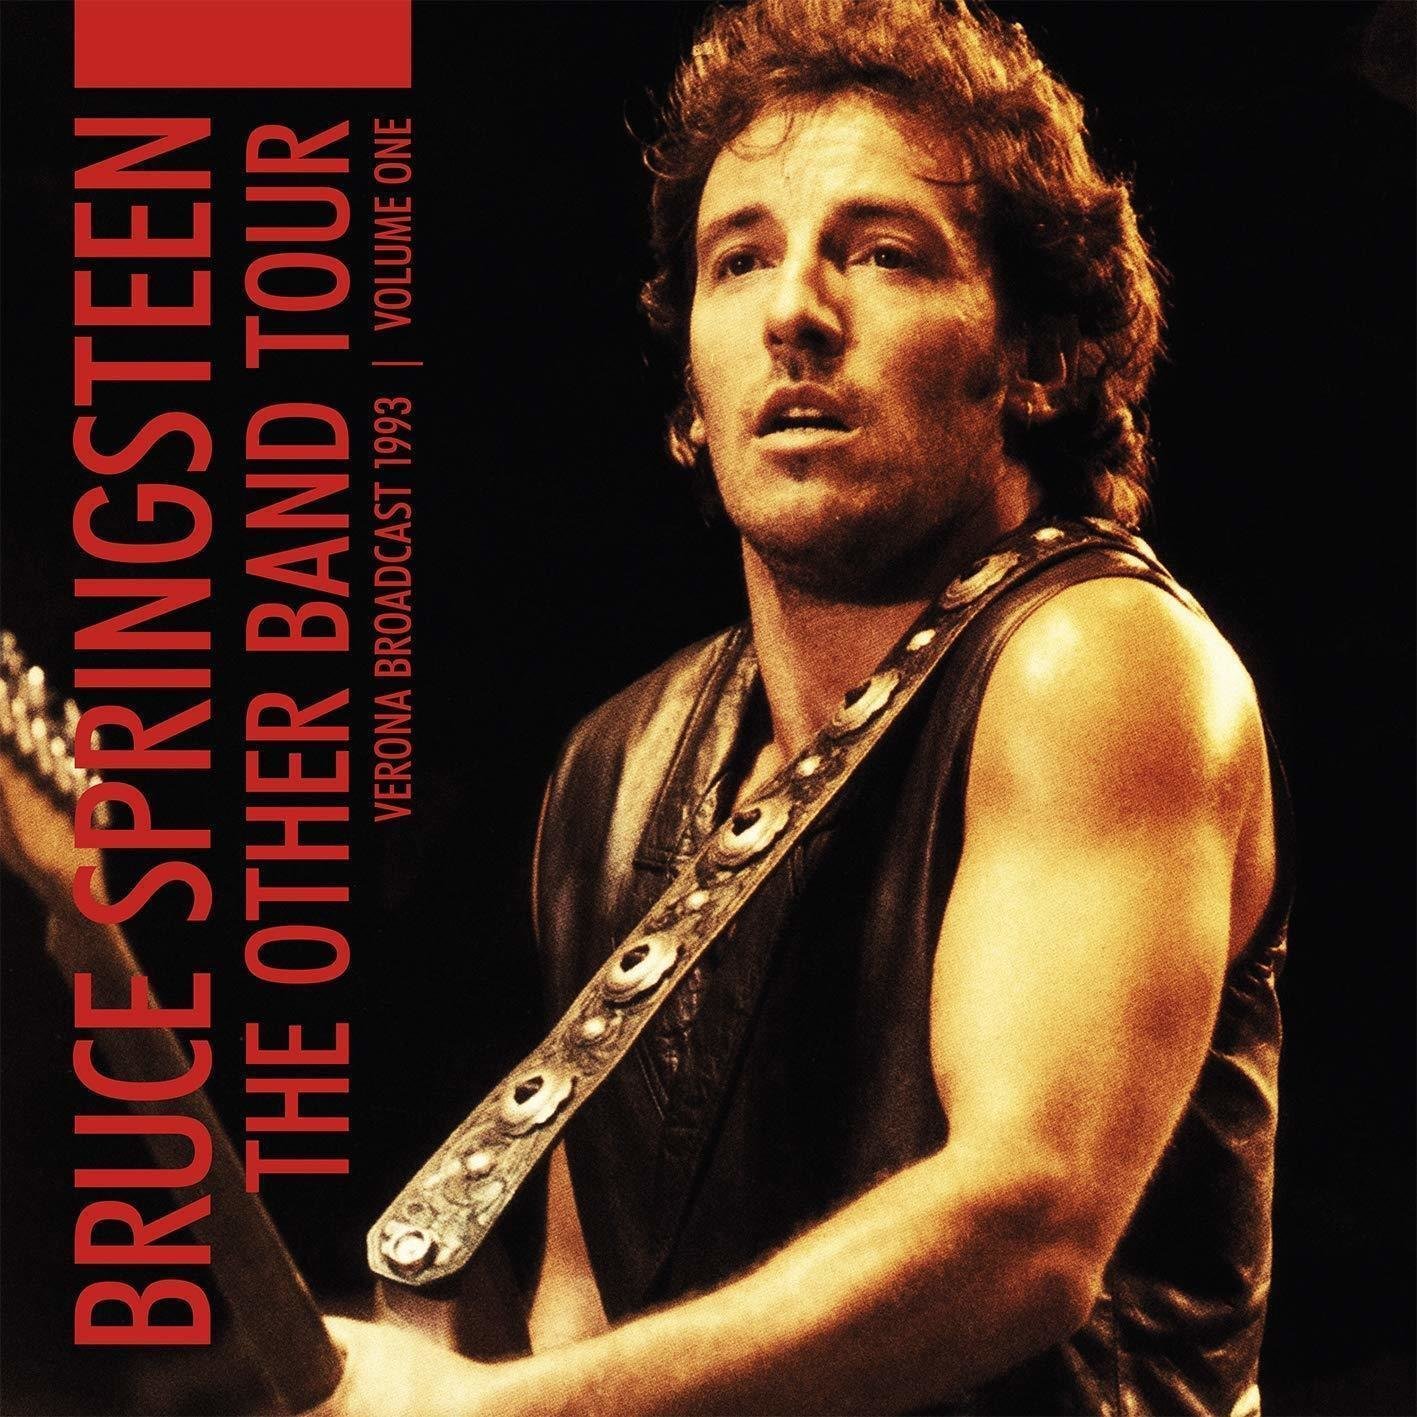 Disque vinyle Bruce Springsteen - The Other Band Tour - Verona Broadcast 1993 - Volume One (2 LP)